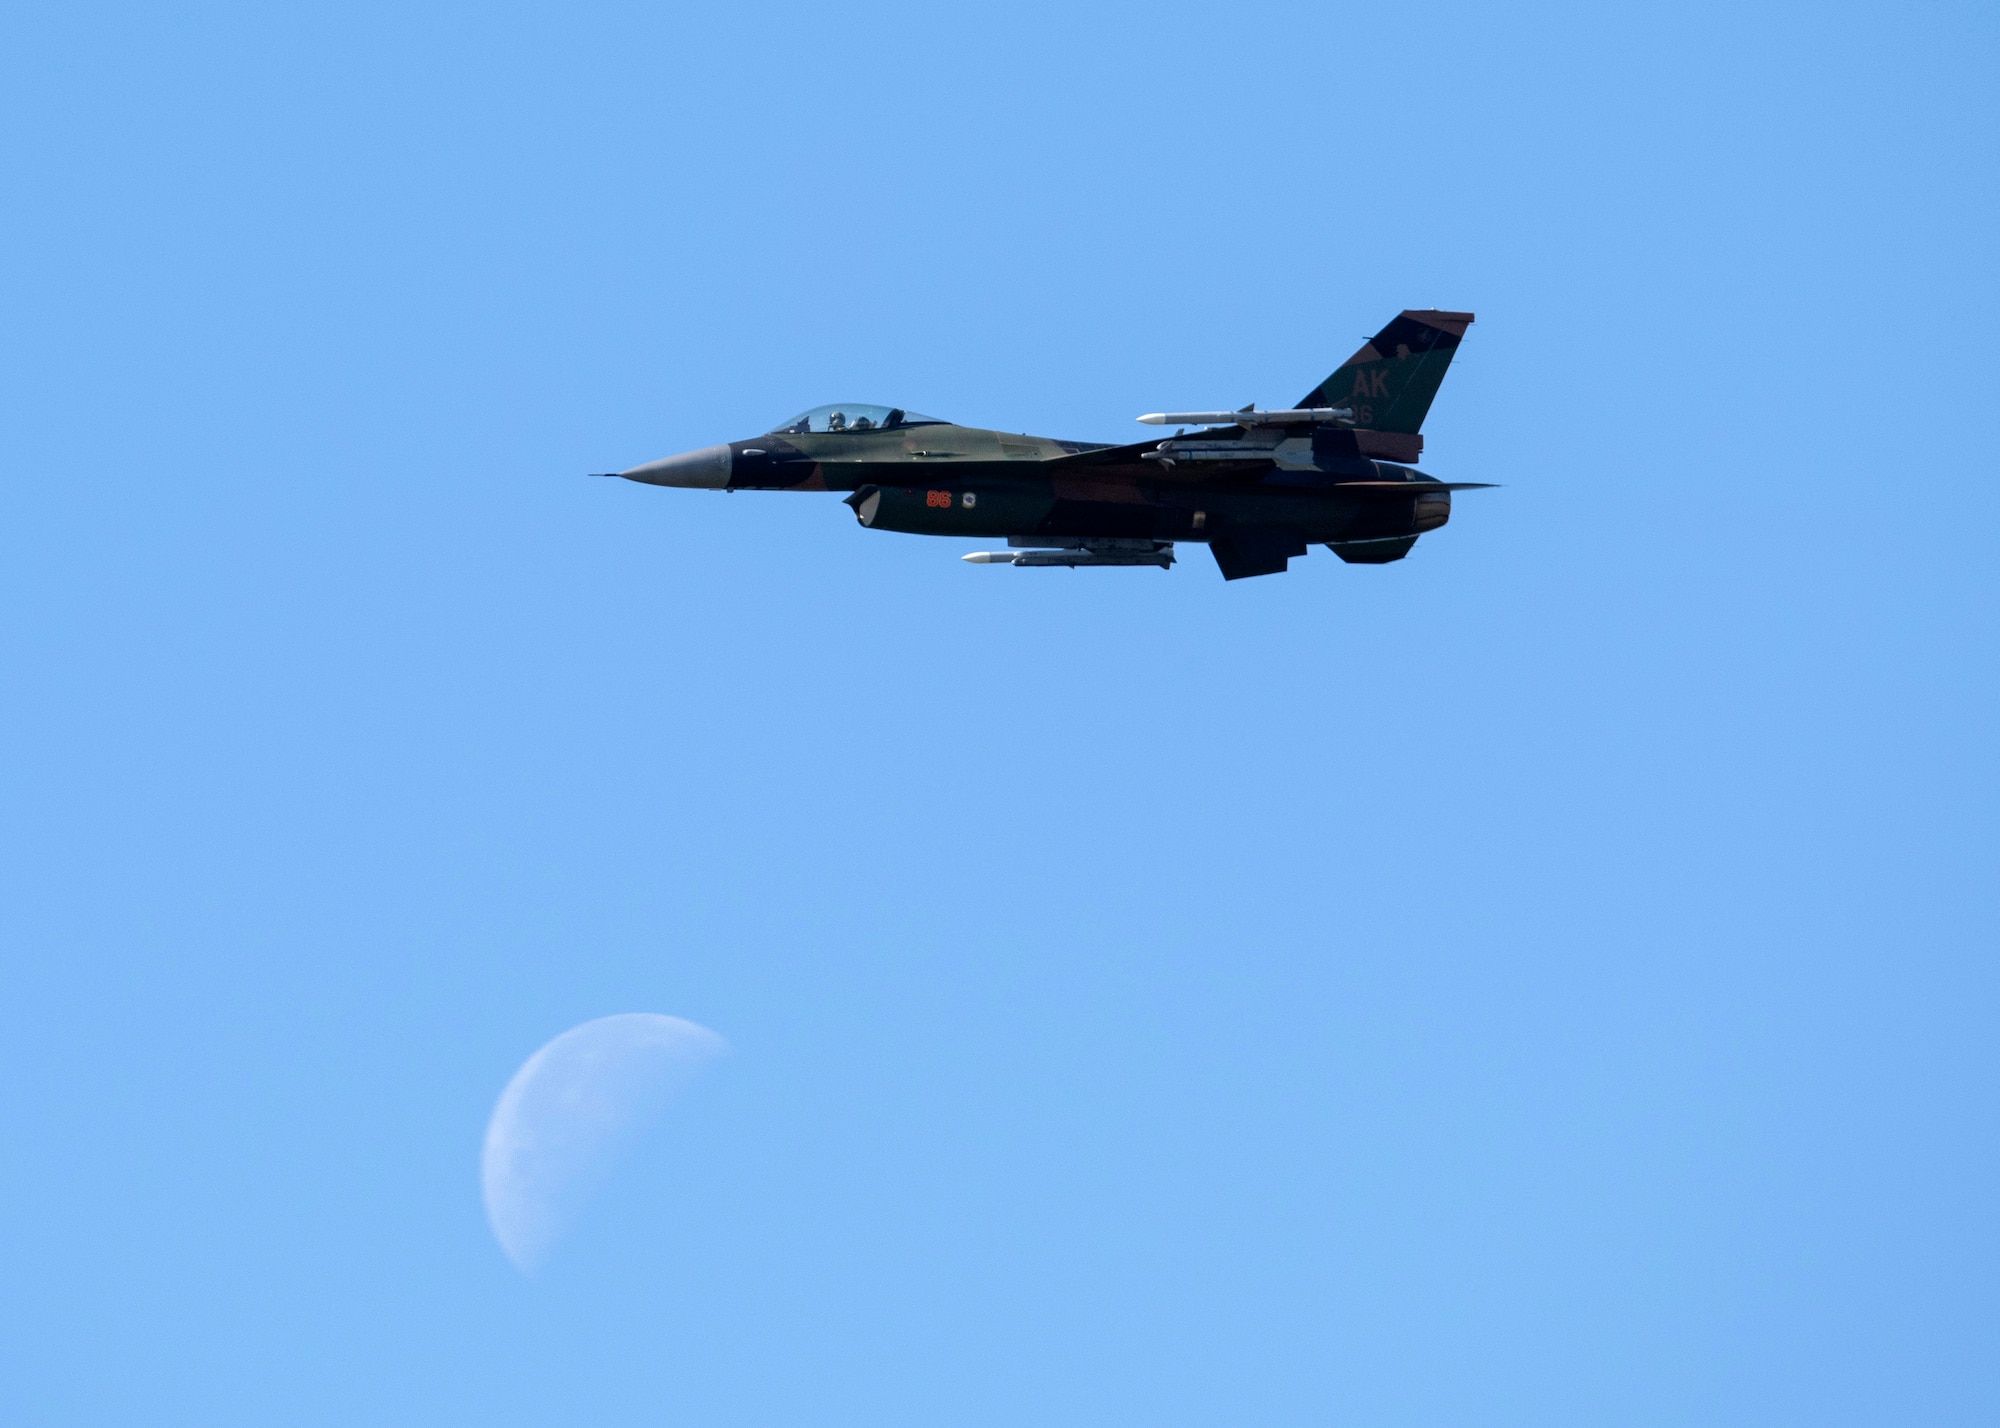 A U.S. Air Force F-16 Fighting Falcon assigned to the 18th Aggressor Squadron flies as part of Arctic Lighting Airshow 2021 at Eielson Air Force Base, Alaska, July 31, 2021.